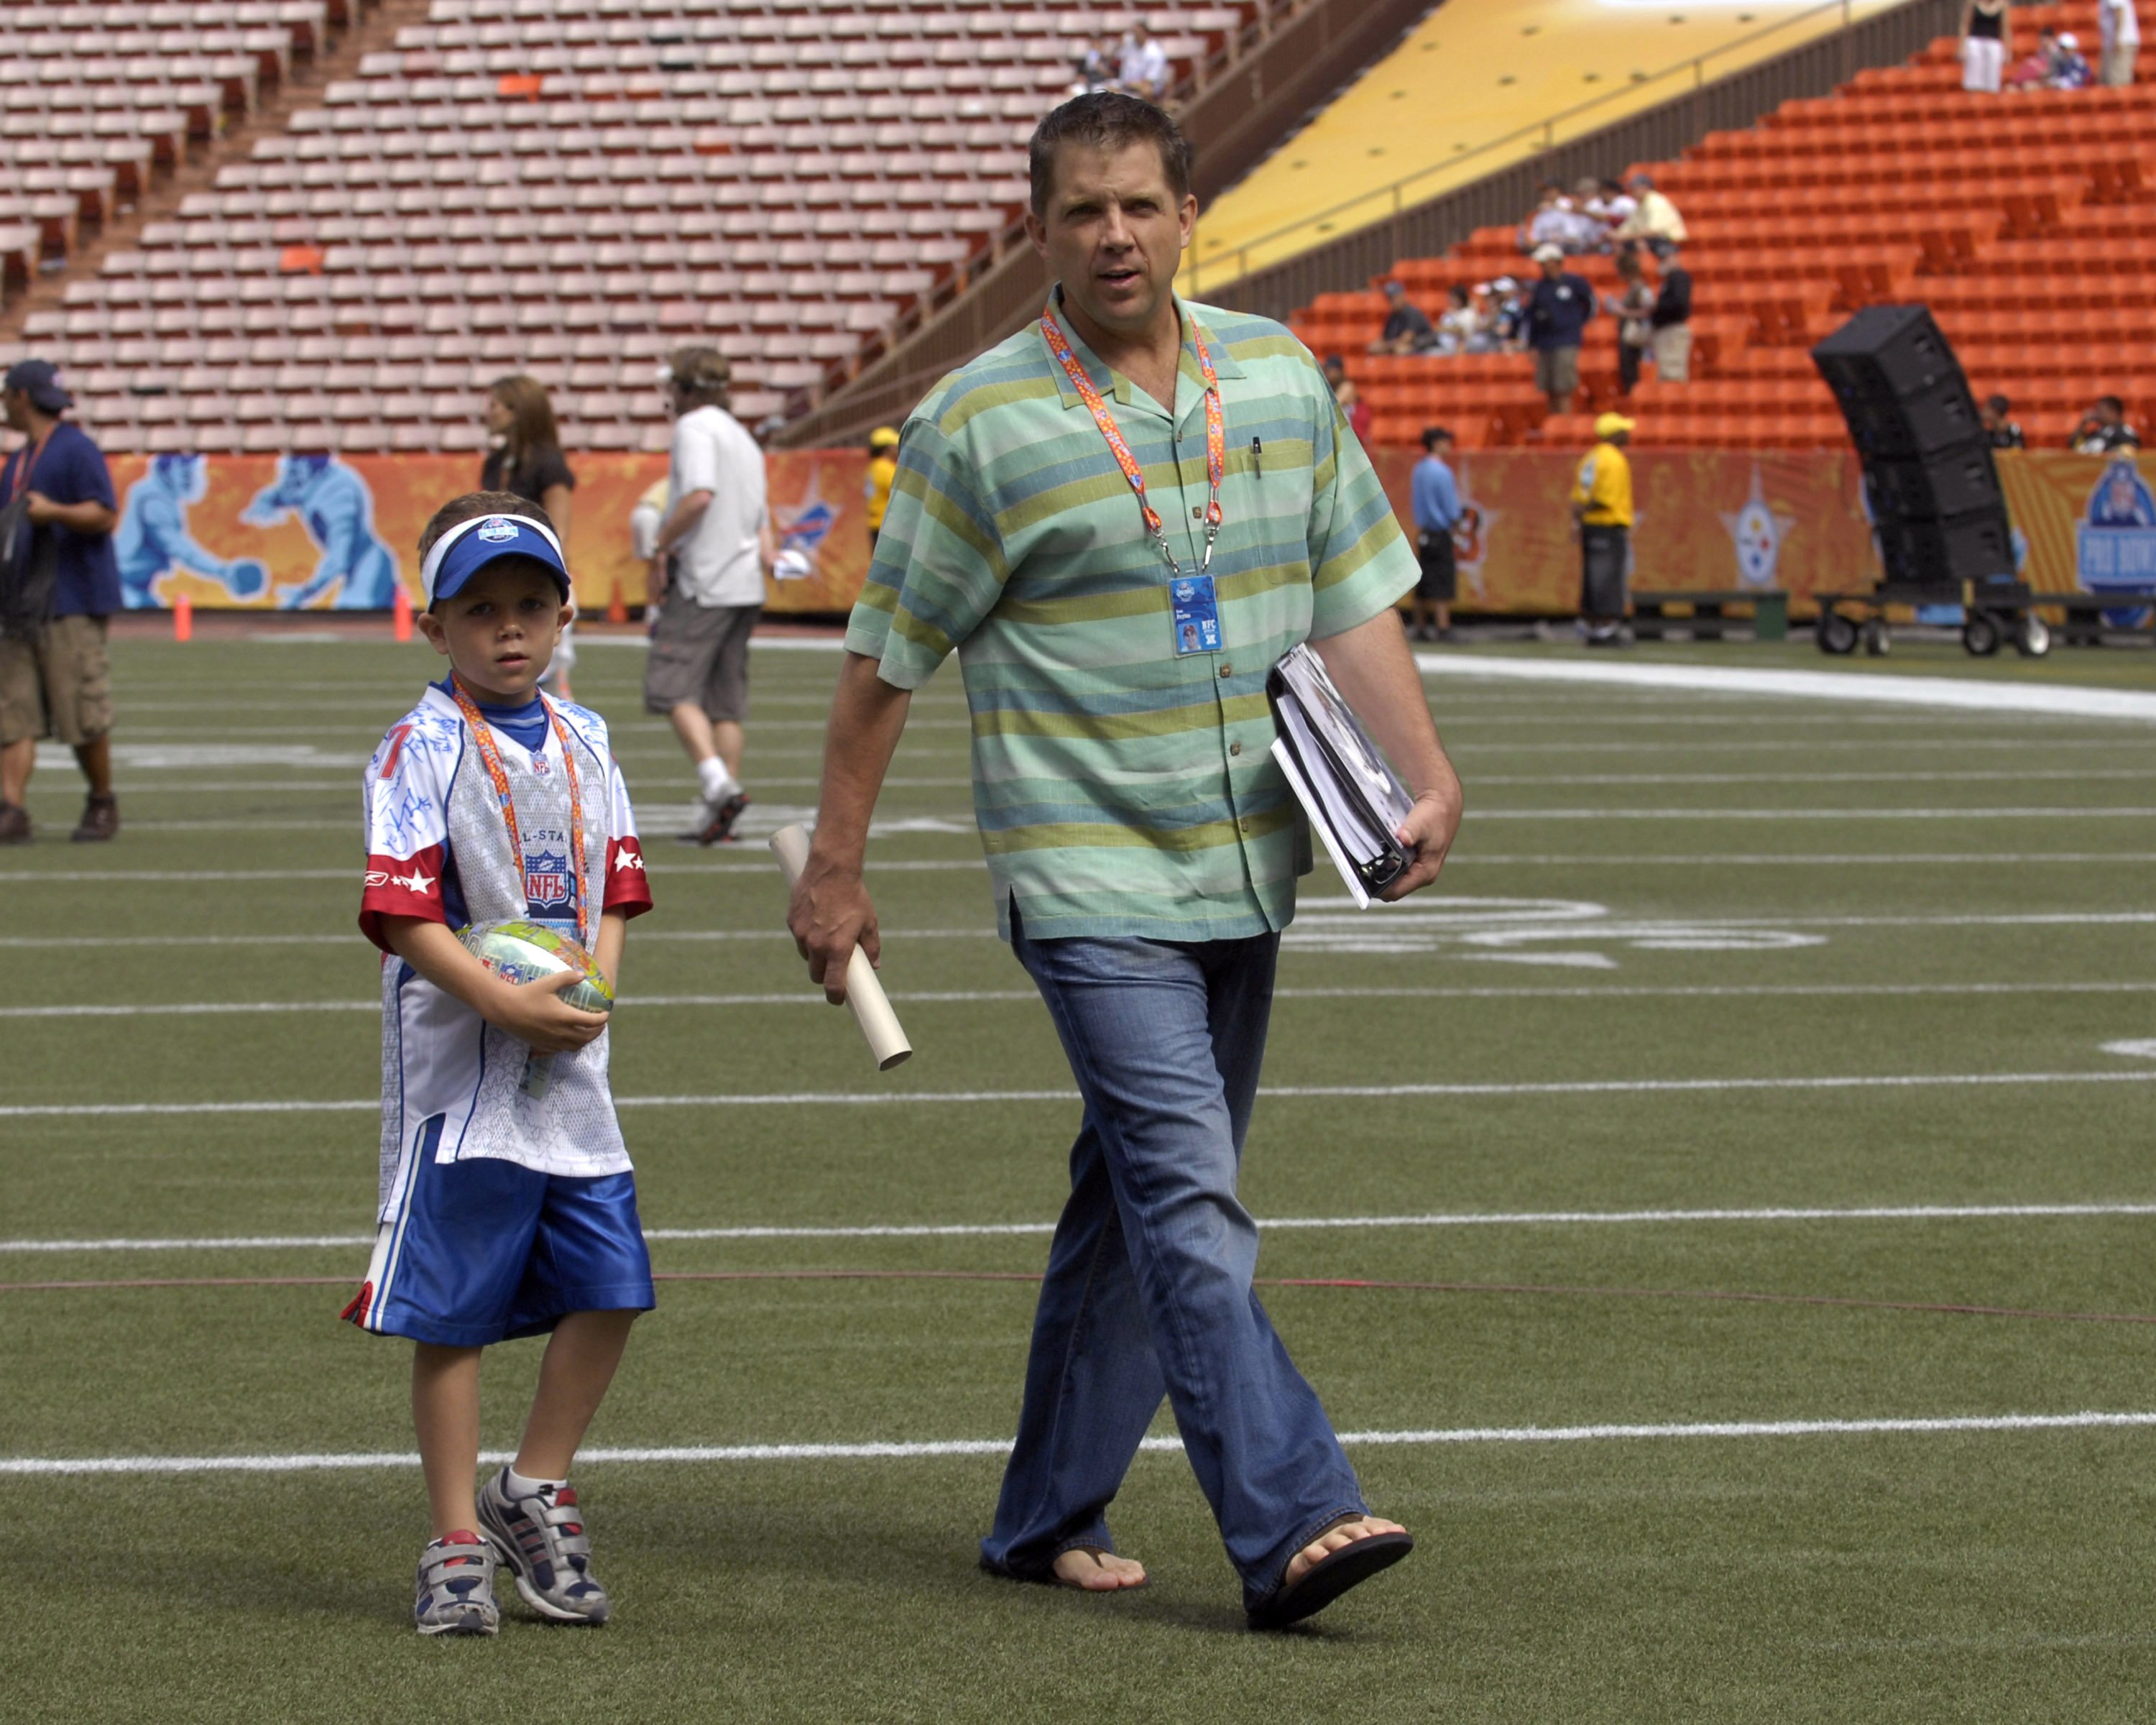 Connor Payton and Sean Payton at the NFL Pro Bowl game on February 10, 2007, in Honolulu, Hawaii | Source: Getty Images